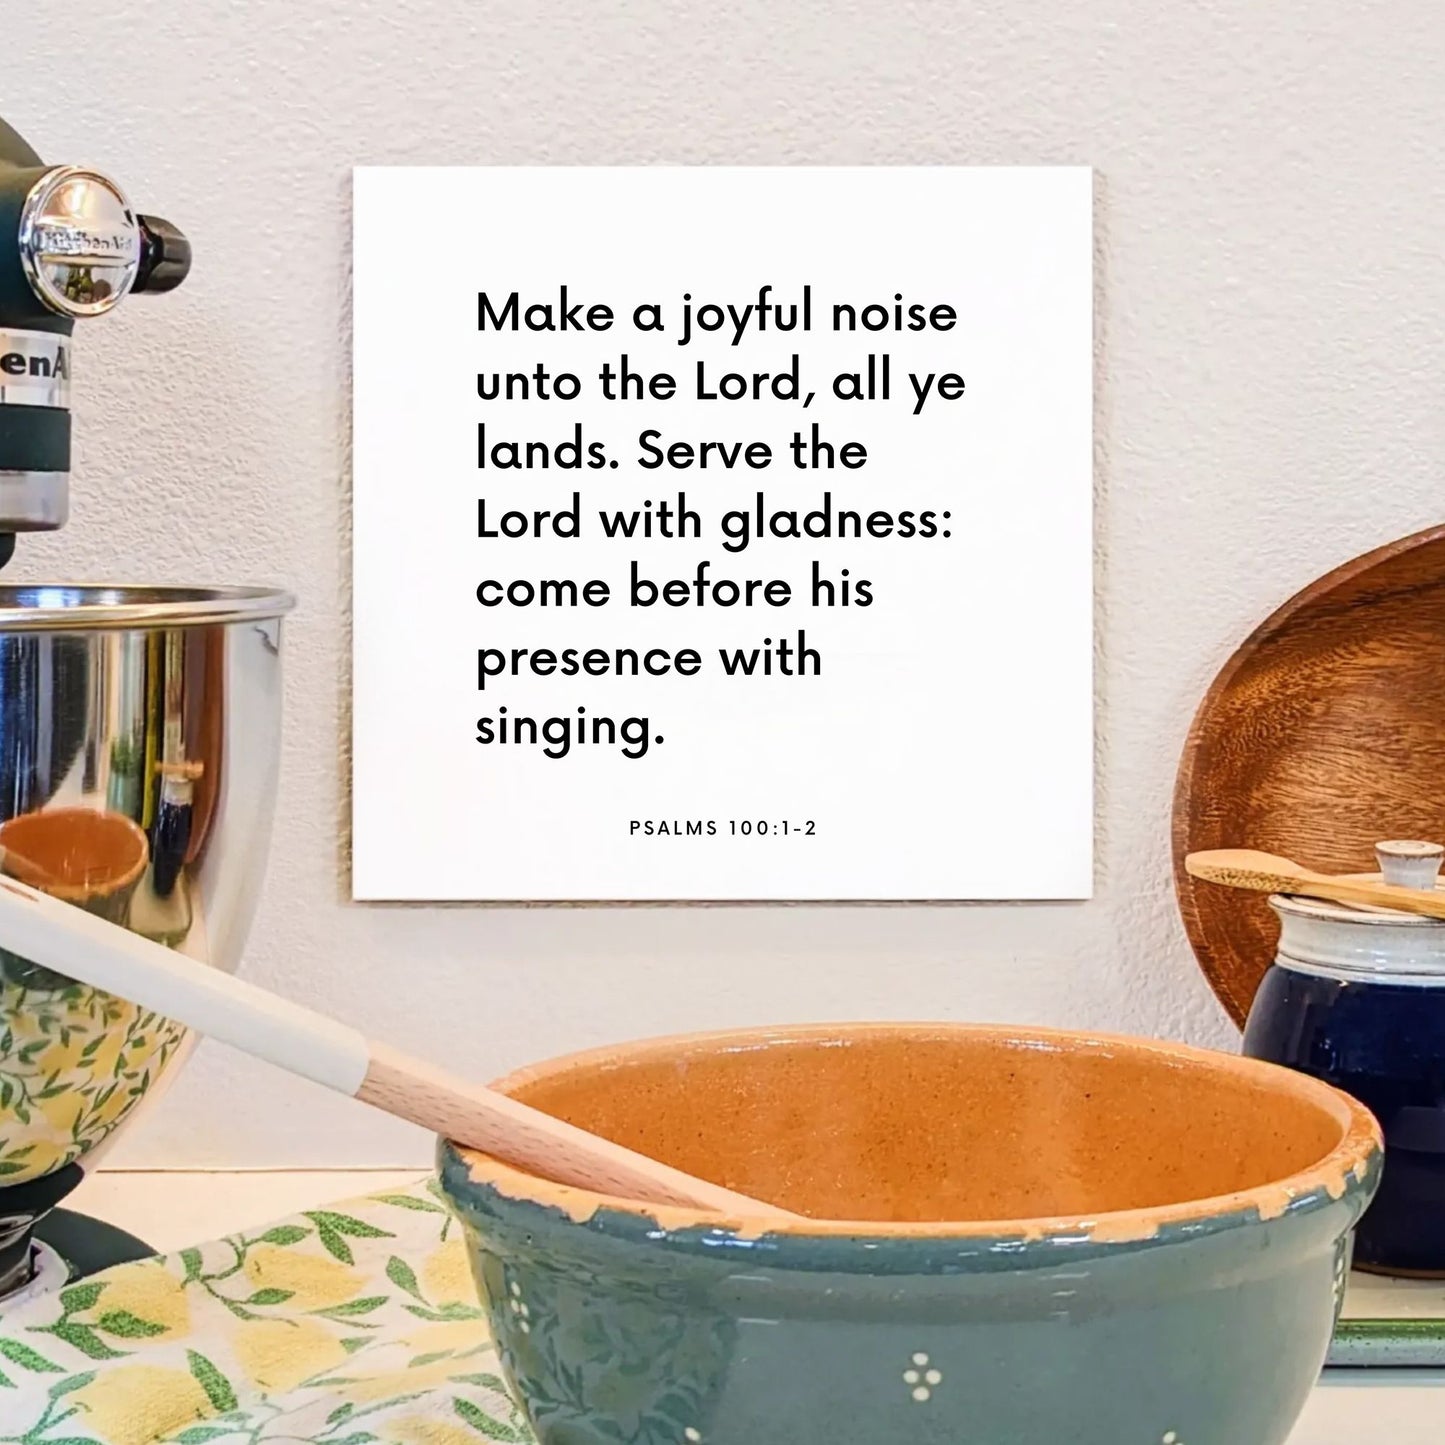 Kitchen mouting of the scripture tile for Psalms 100:1-2 - "Make a joyful noise unto the Lord, all ye lands"